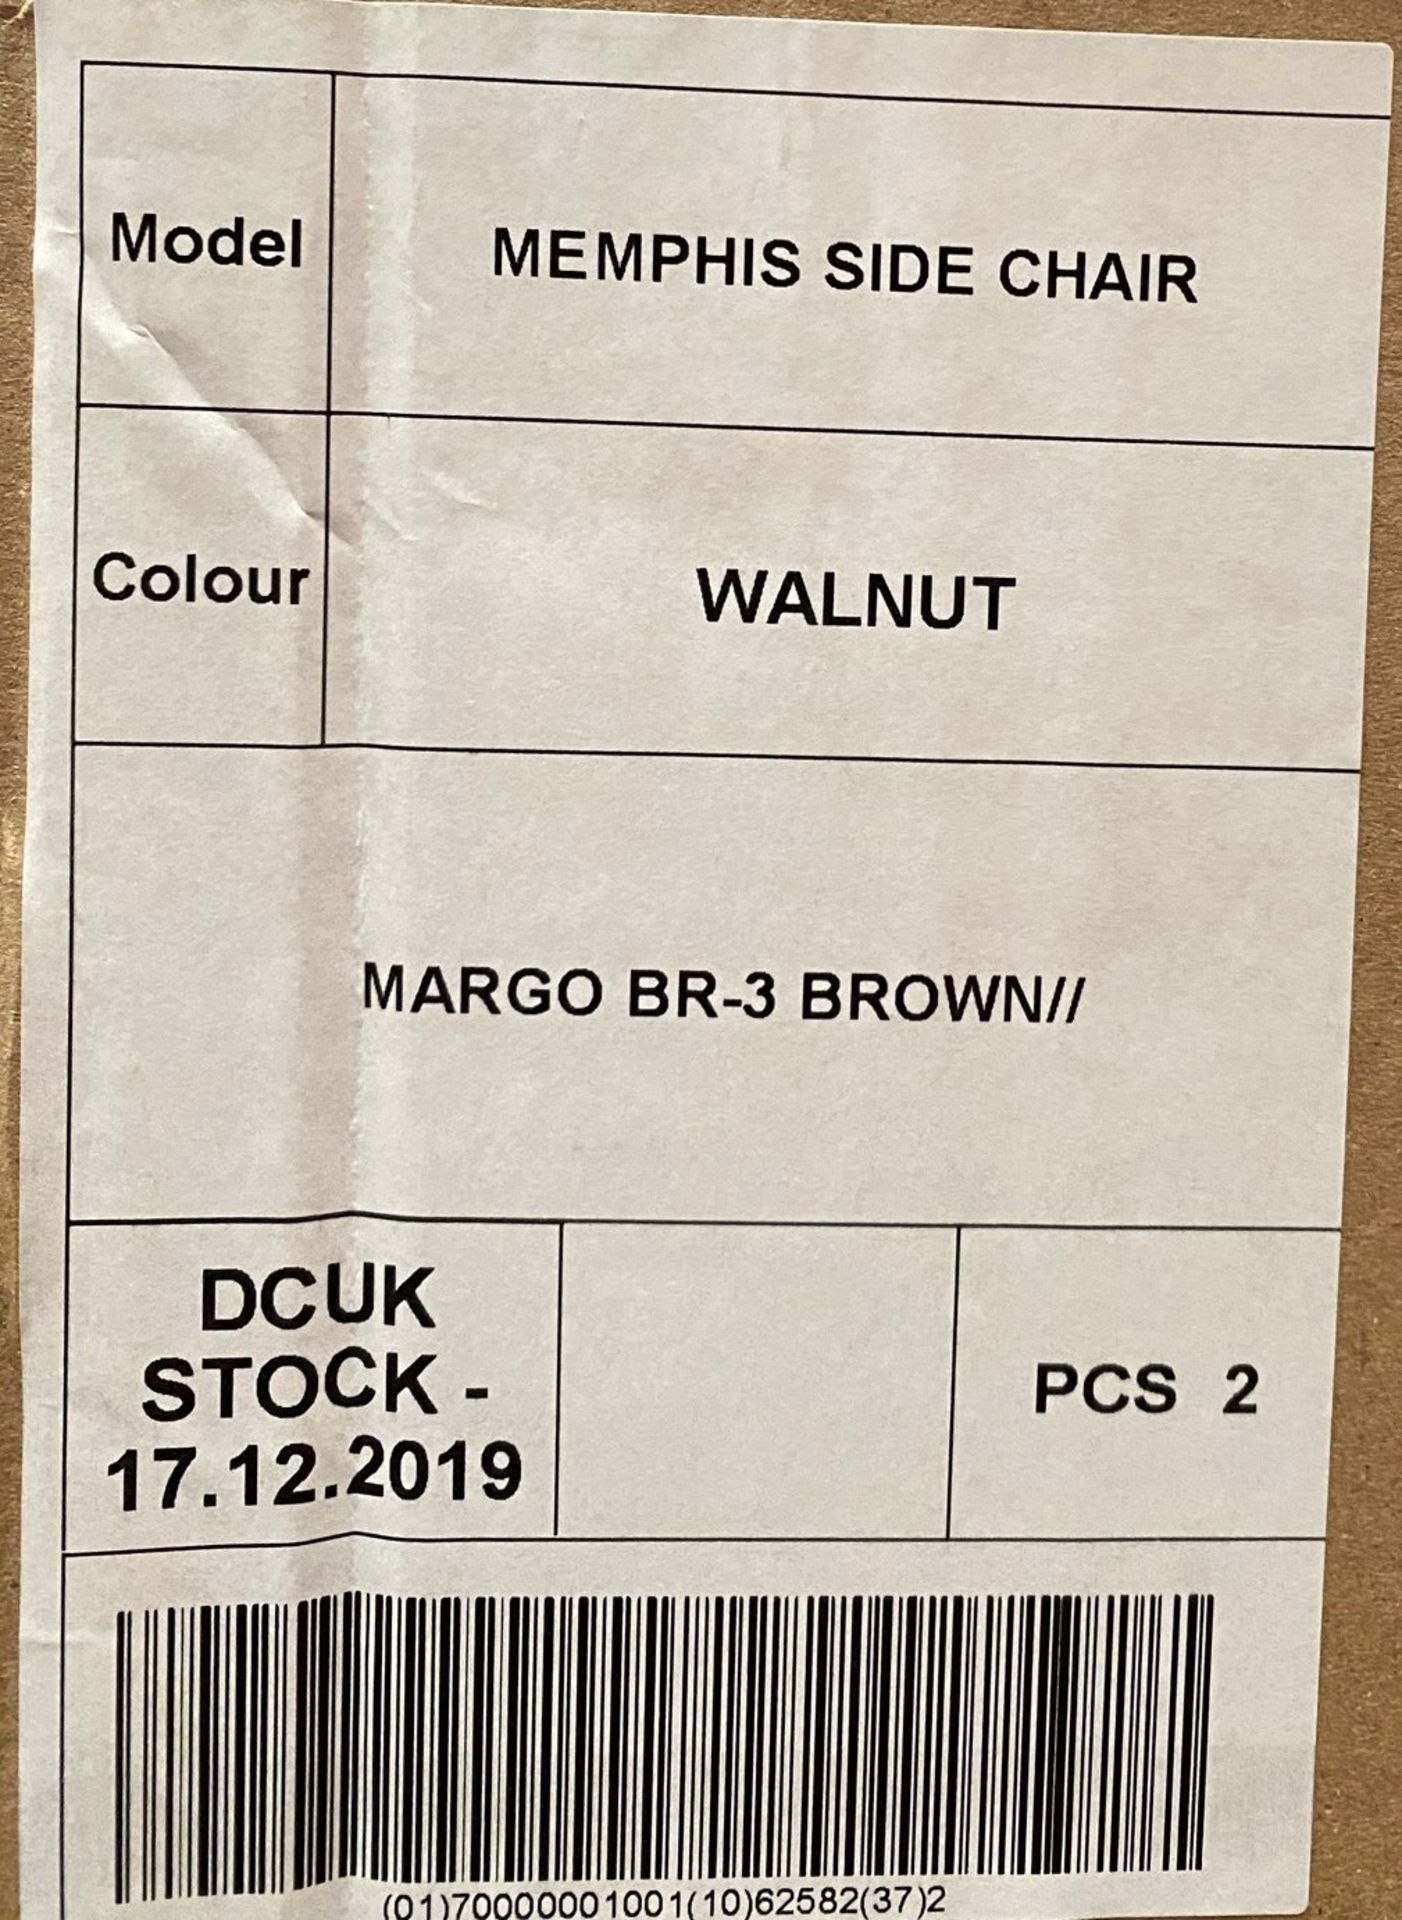 2 x Memphis Margo BR-3 Brown side/dining chairs with walnut coloured frames - Image 4 of 4